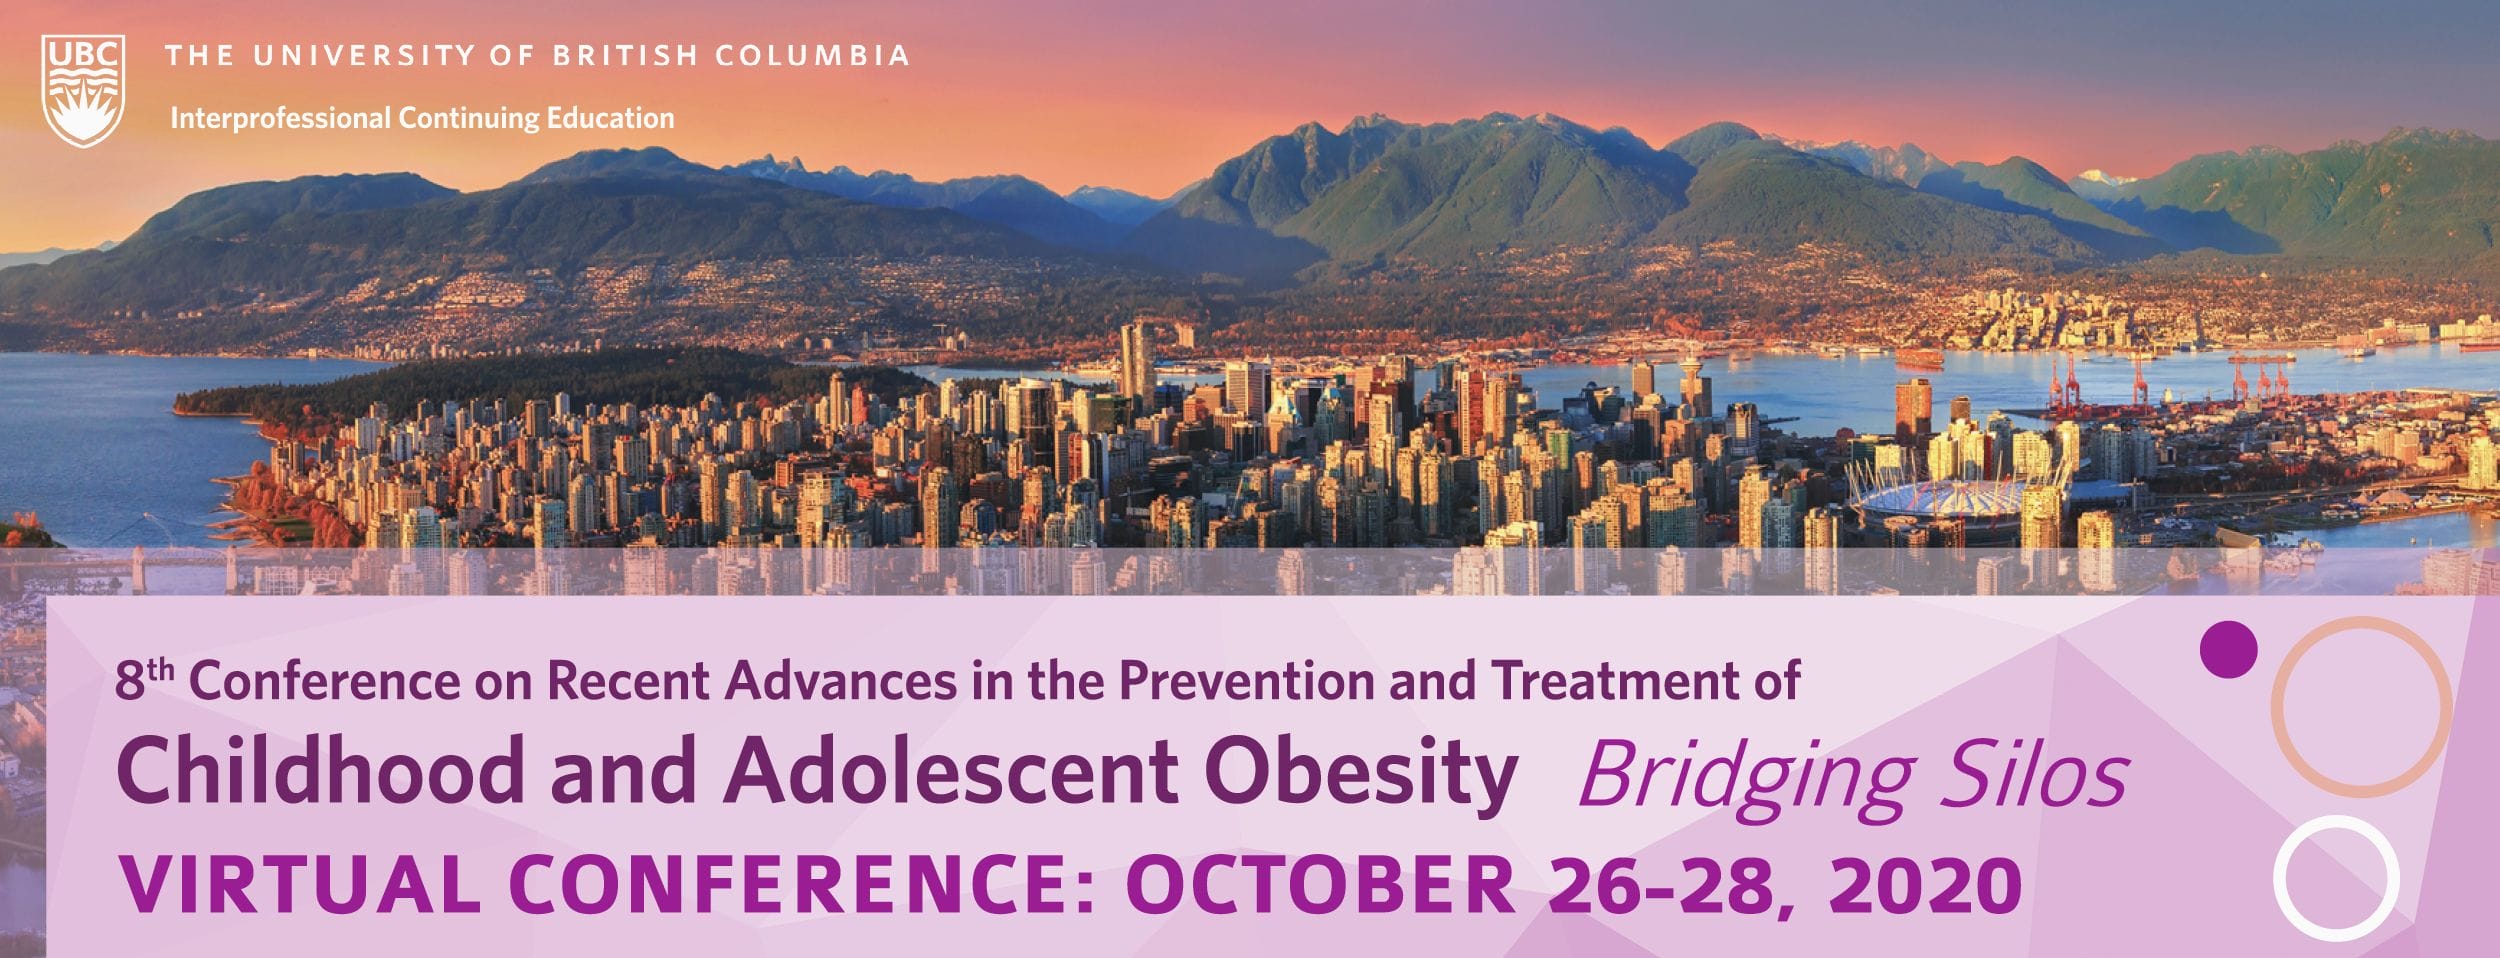 Banner for the 8th conference on childhood and adolescent obesity at ubc, showing a panoramic view of vancouver with event details, october 26-28, 2020.